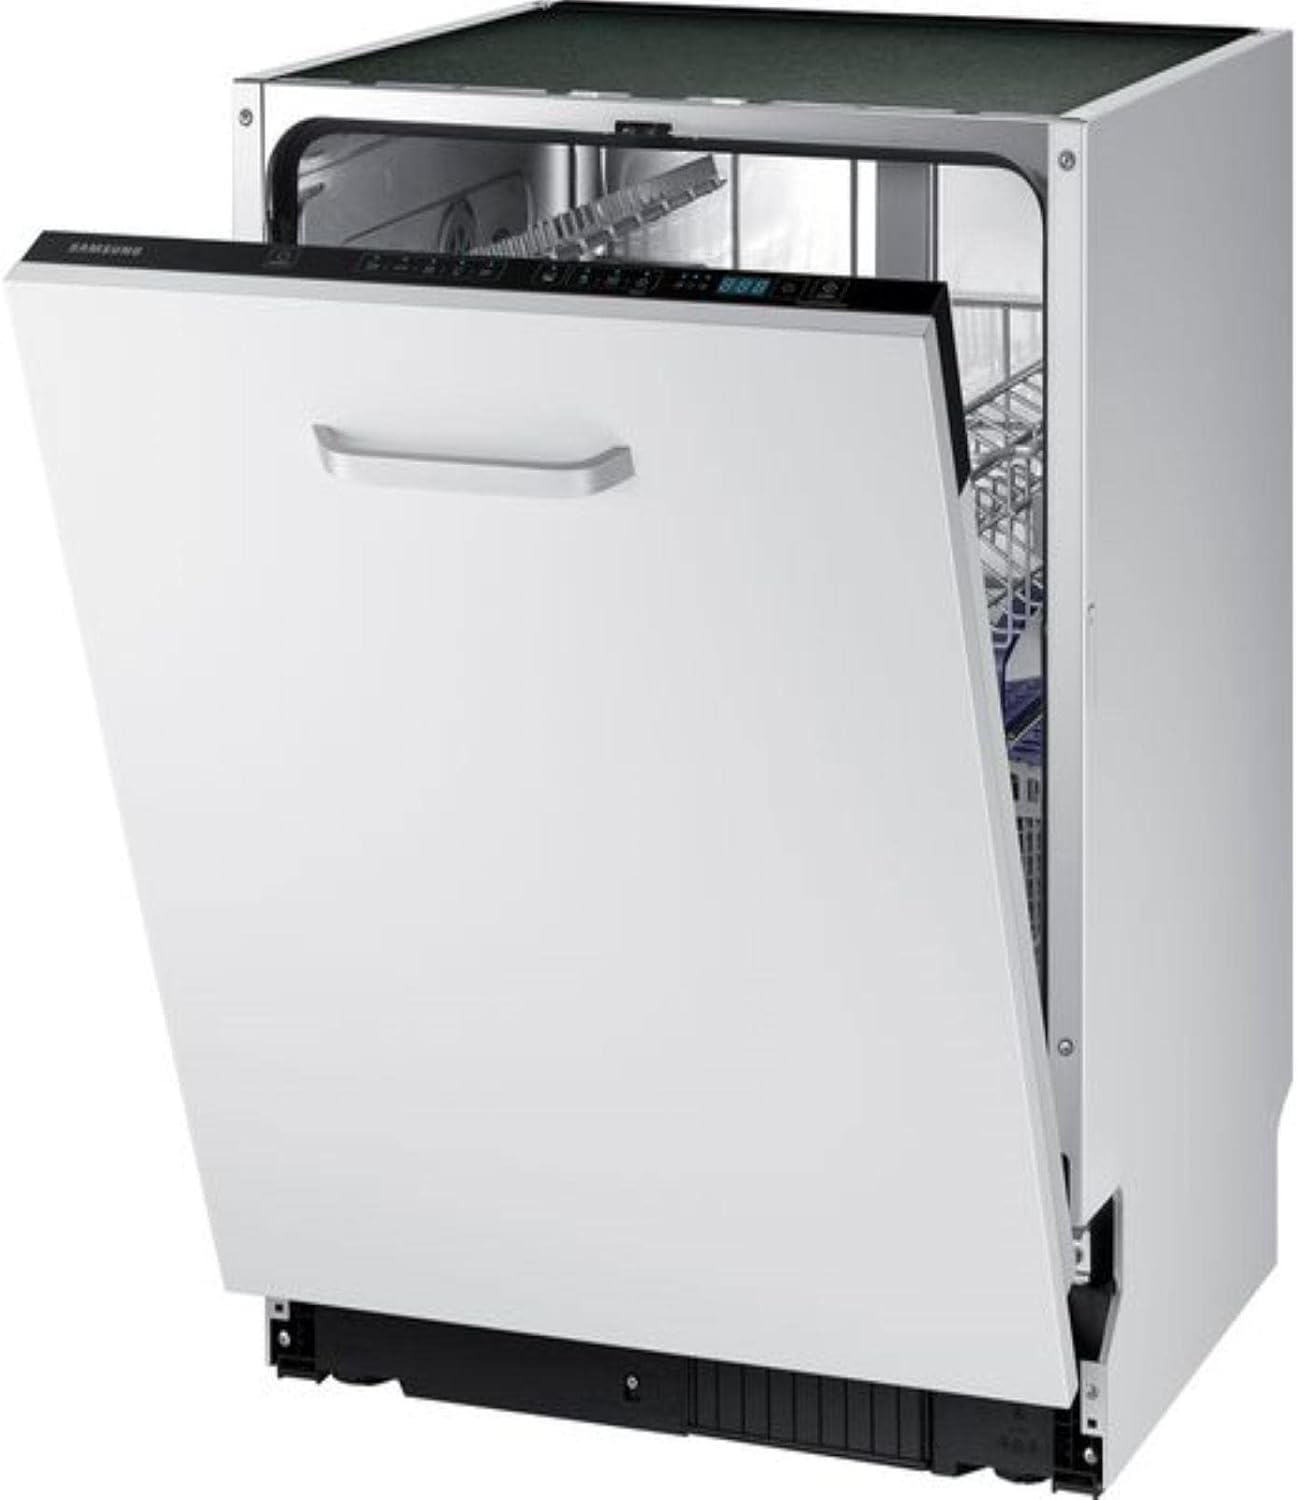 Samsung DW60M5050BB Fully Integrated Standard Dishwasher - Black Control Panel with Fixed Door Fixing Kit - Amazing Gadgets Outlet